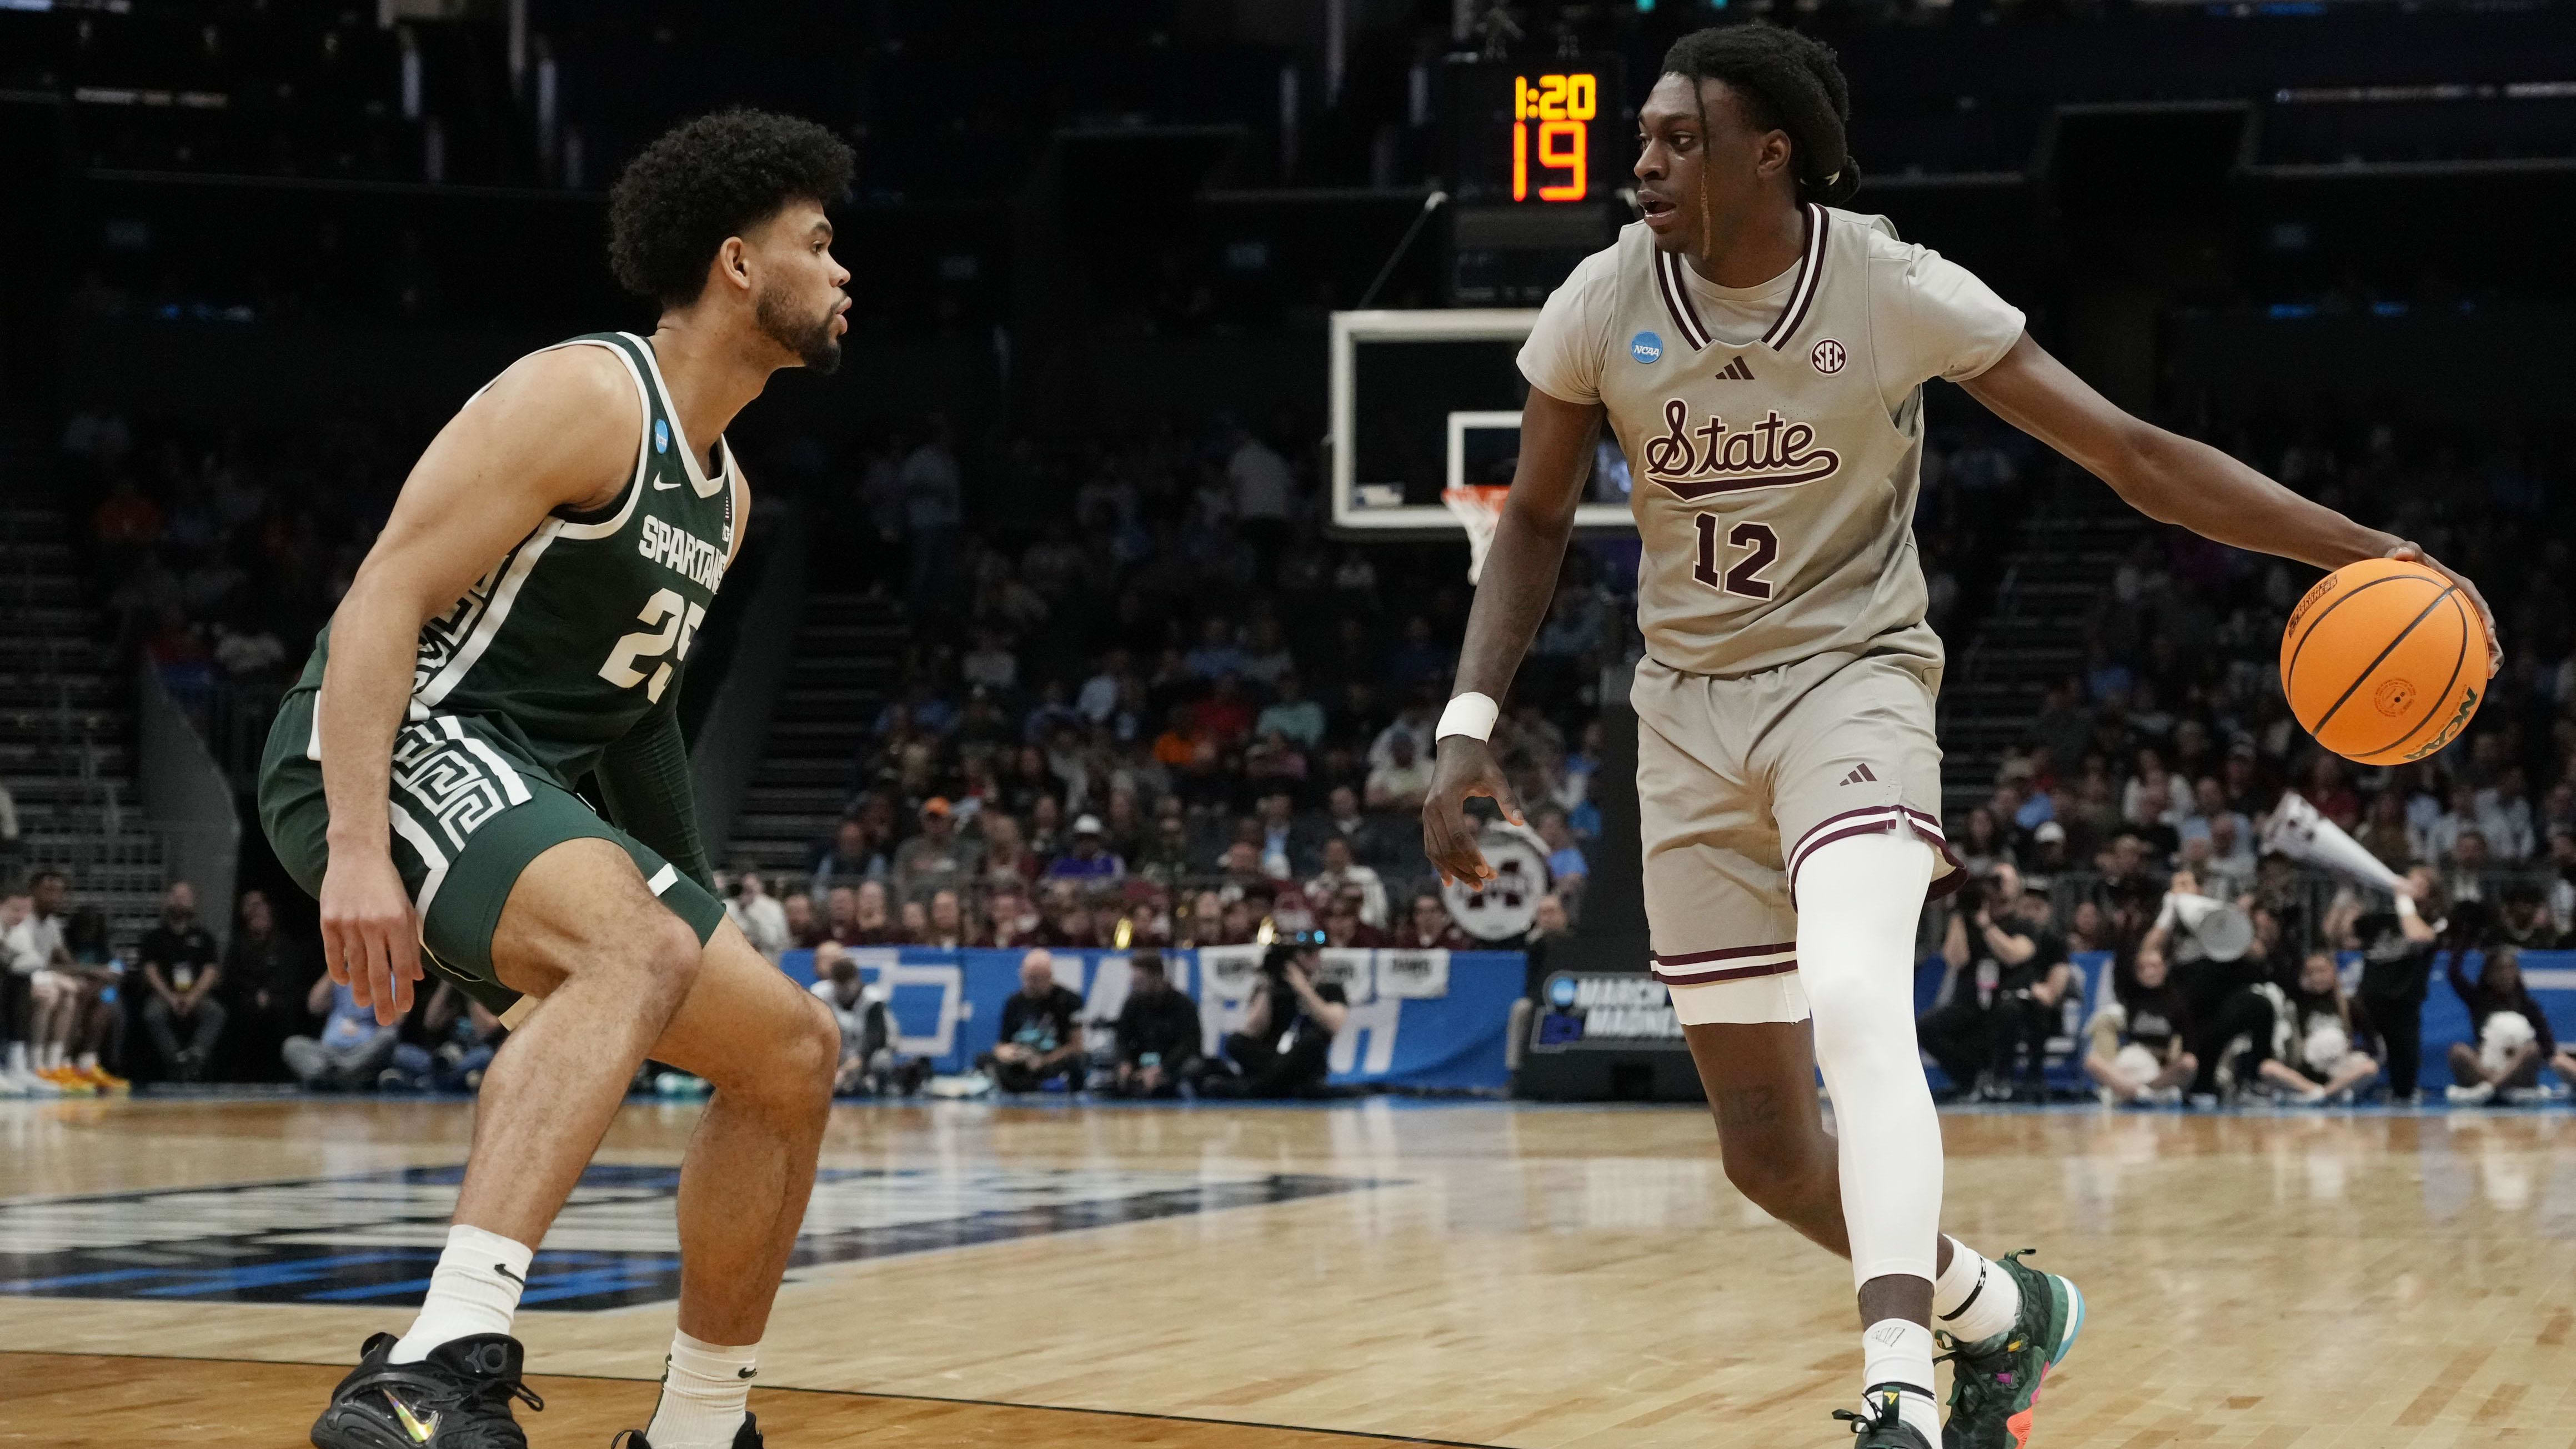 Report: Mississippi State Basketball’s KeShawn Murphy Enters The Transfer Portal